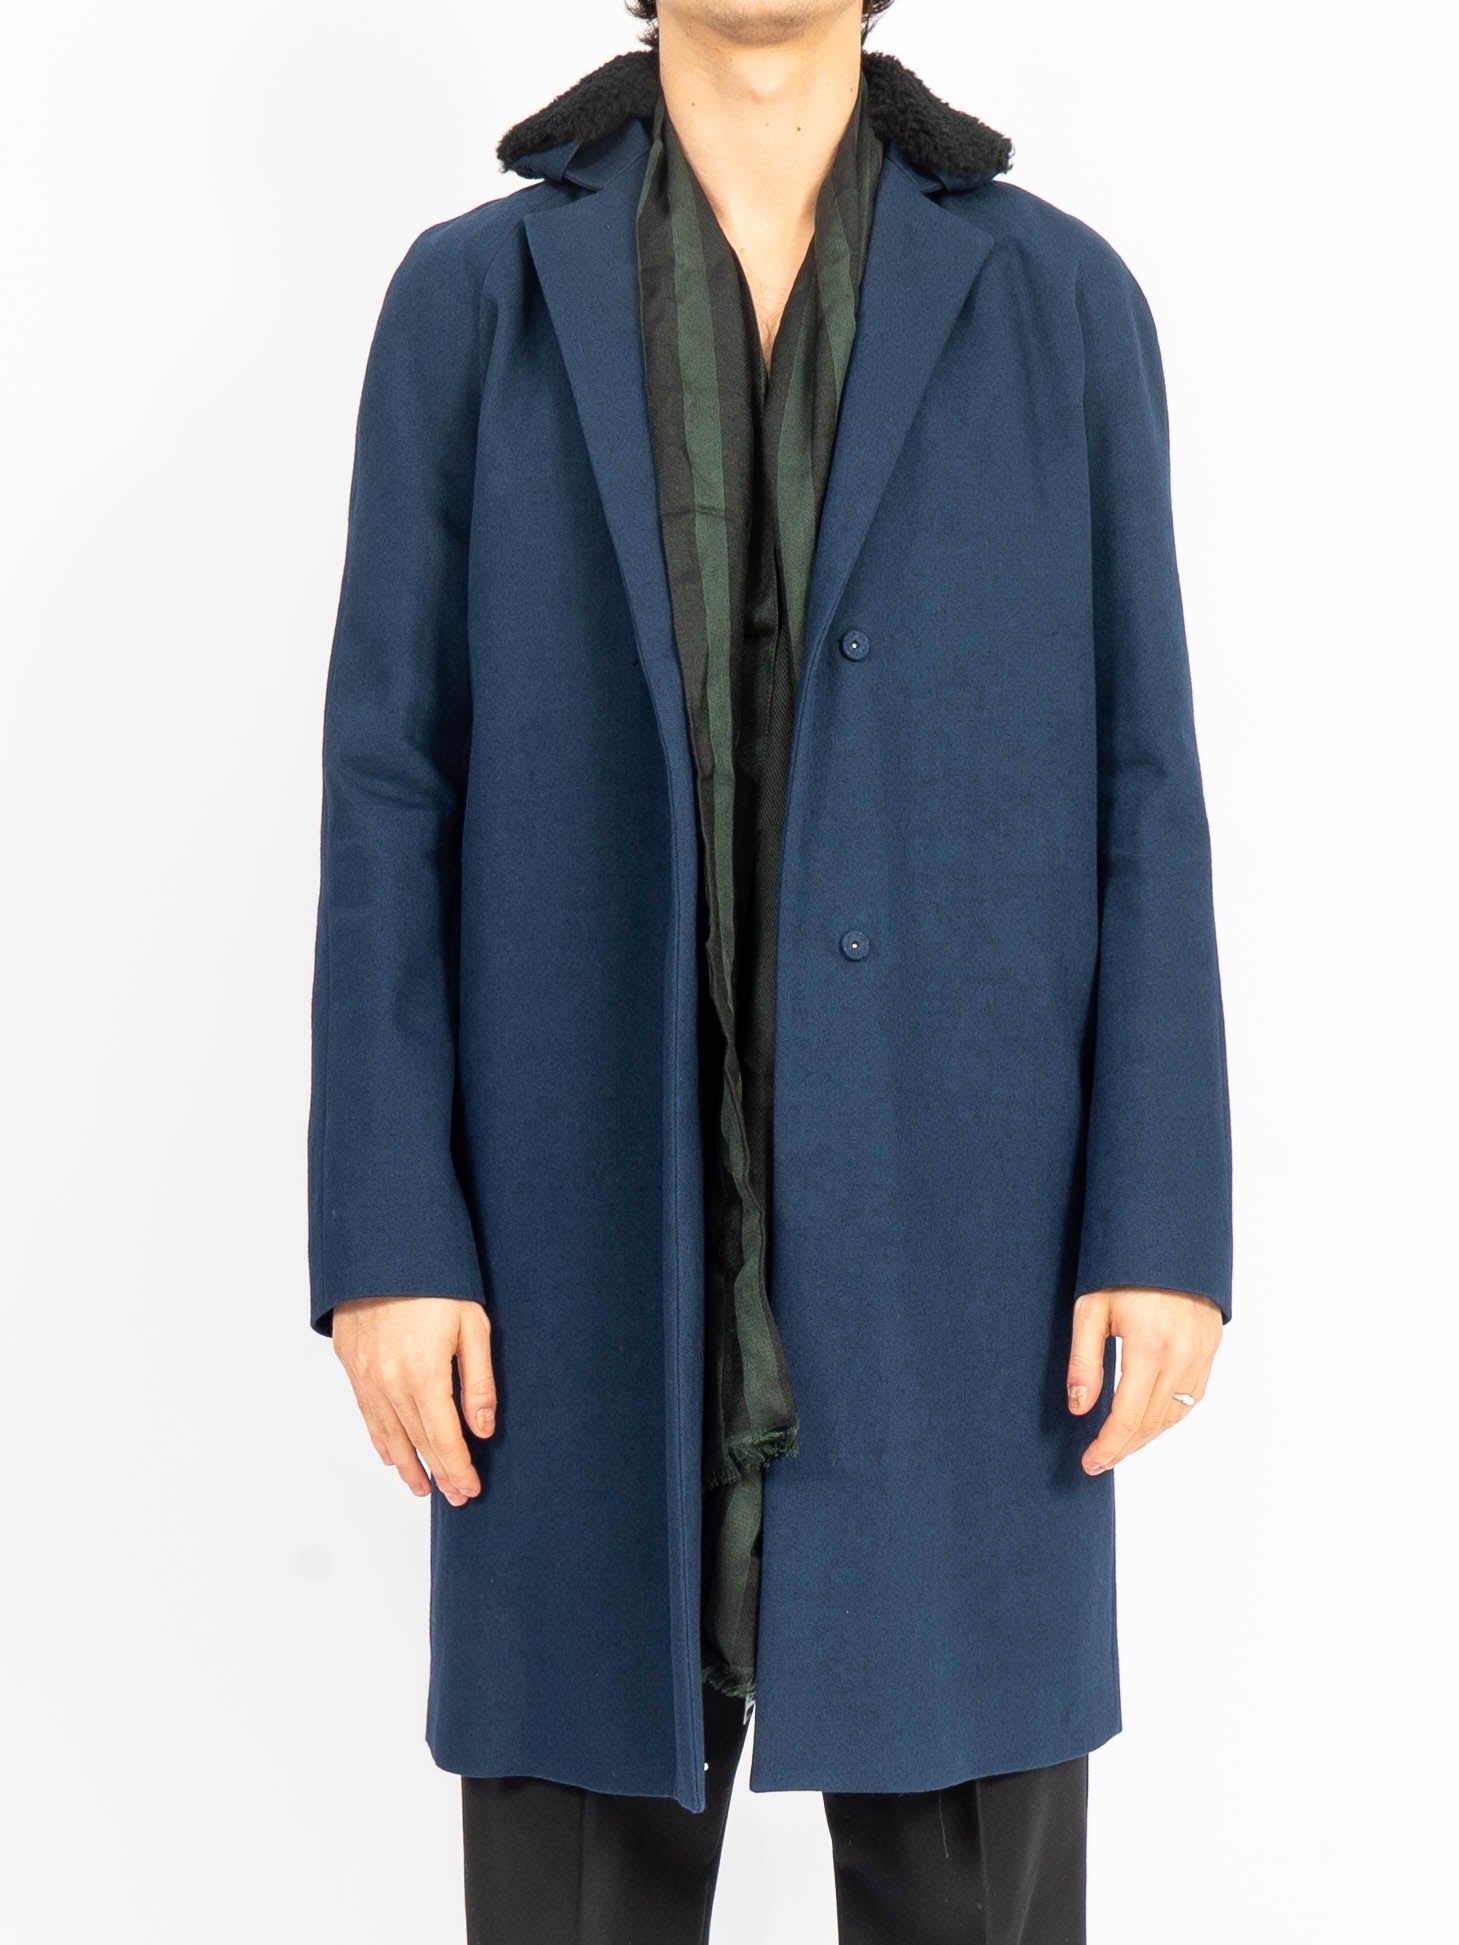 FW17 Cotton Workwear Coat with Shearling Collar Blue